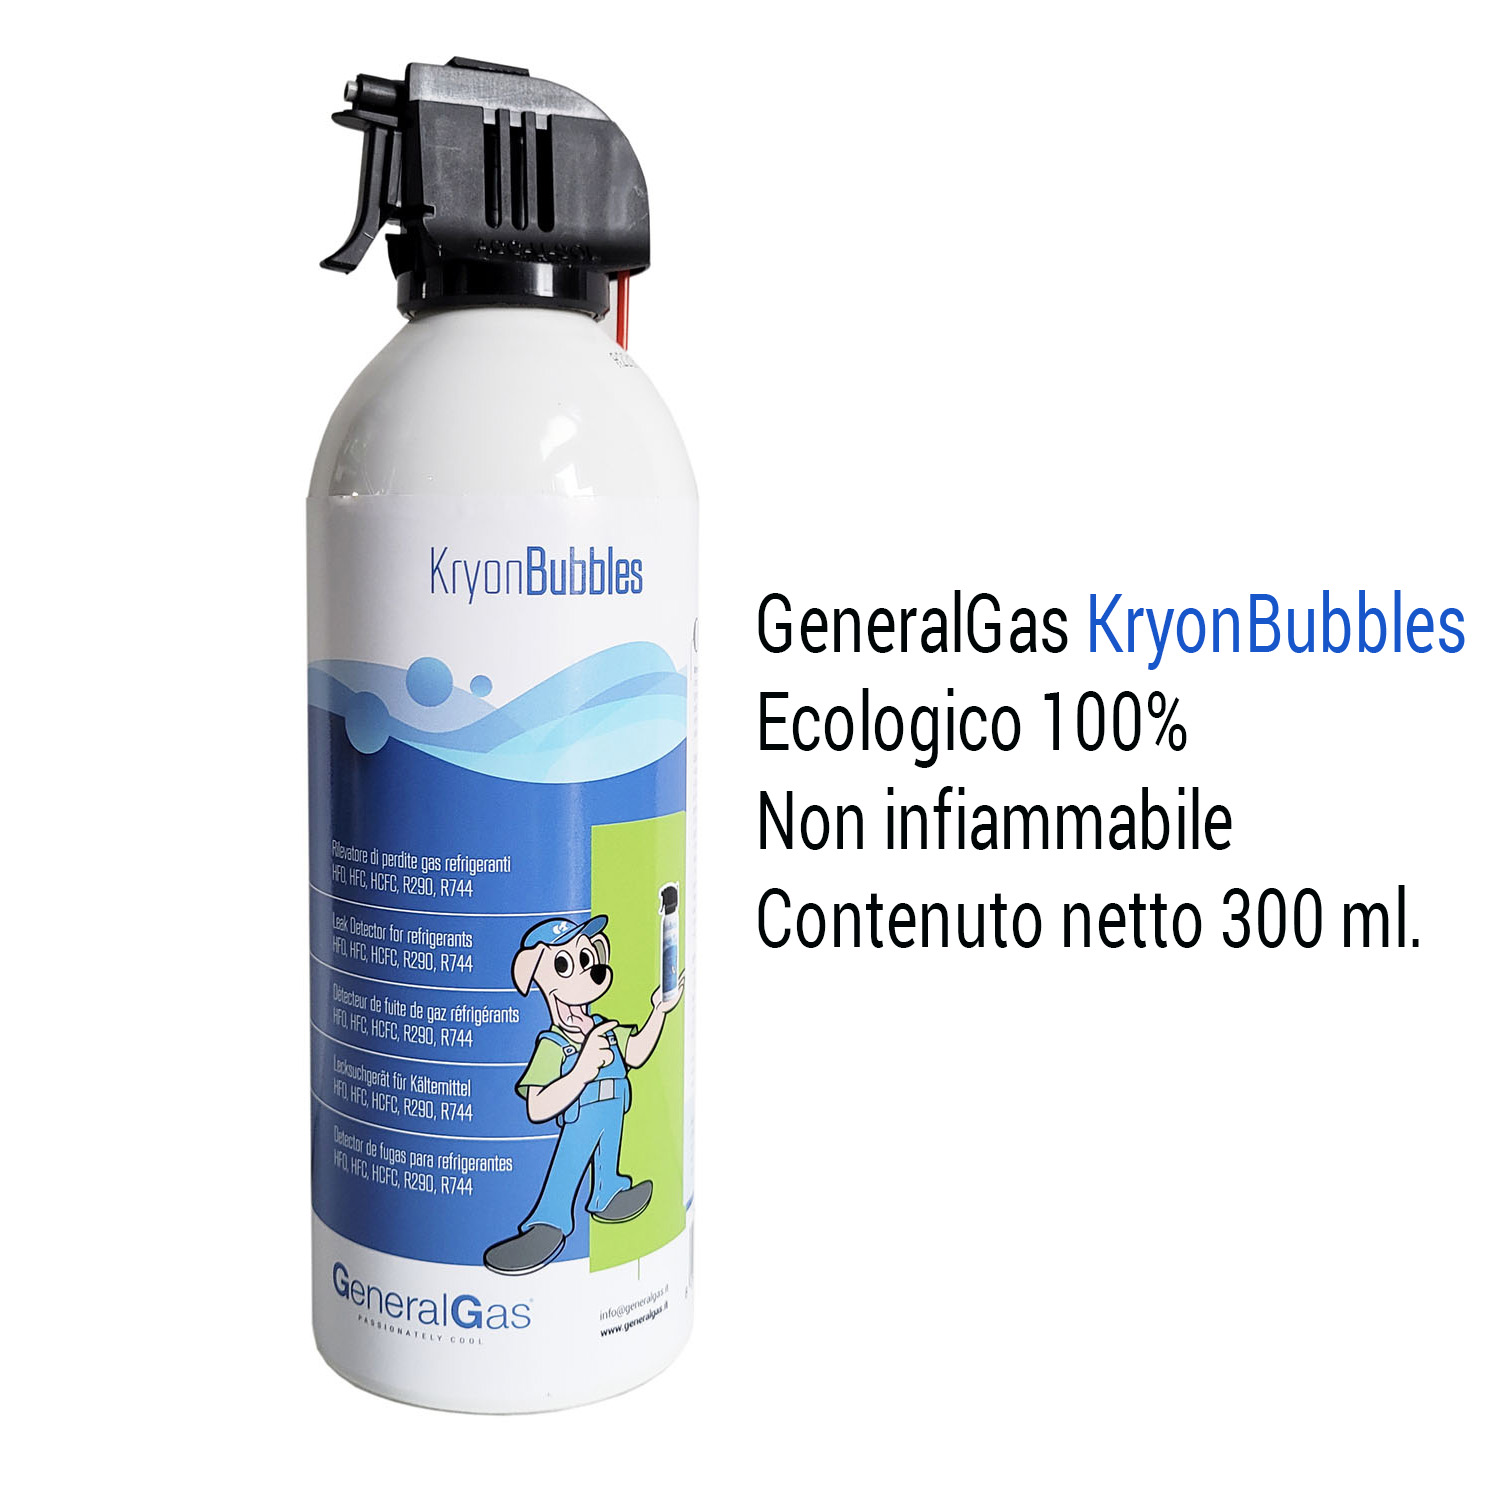 KryonBubbles - Professional non-flammable foaming leak detector for refrigerant gases HFO, HFC, R290, R744 - in 400 ml aluminum spray can - net content excluding propellant 300 ml.